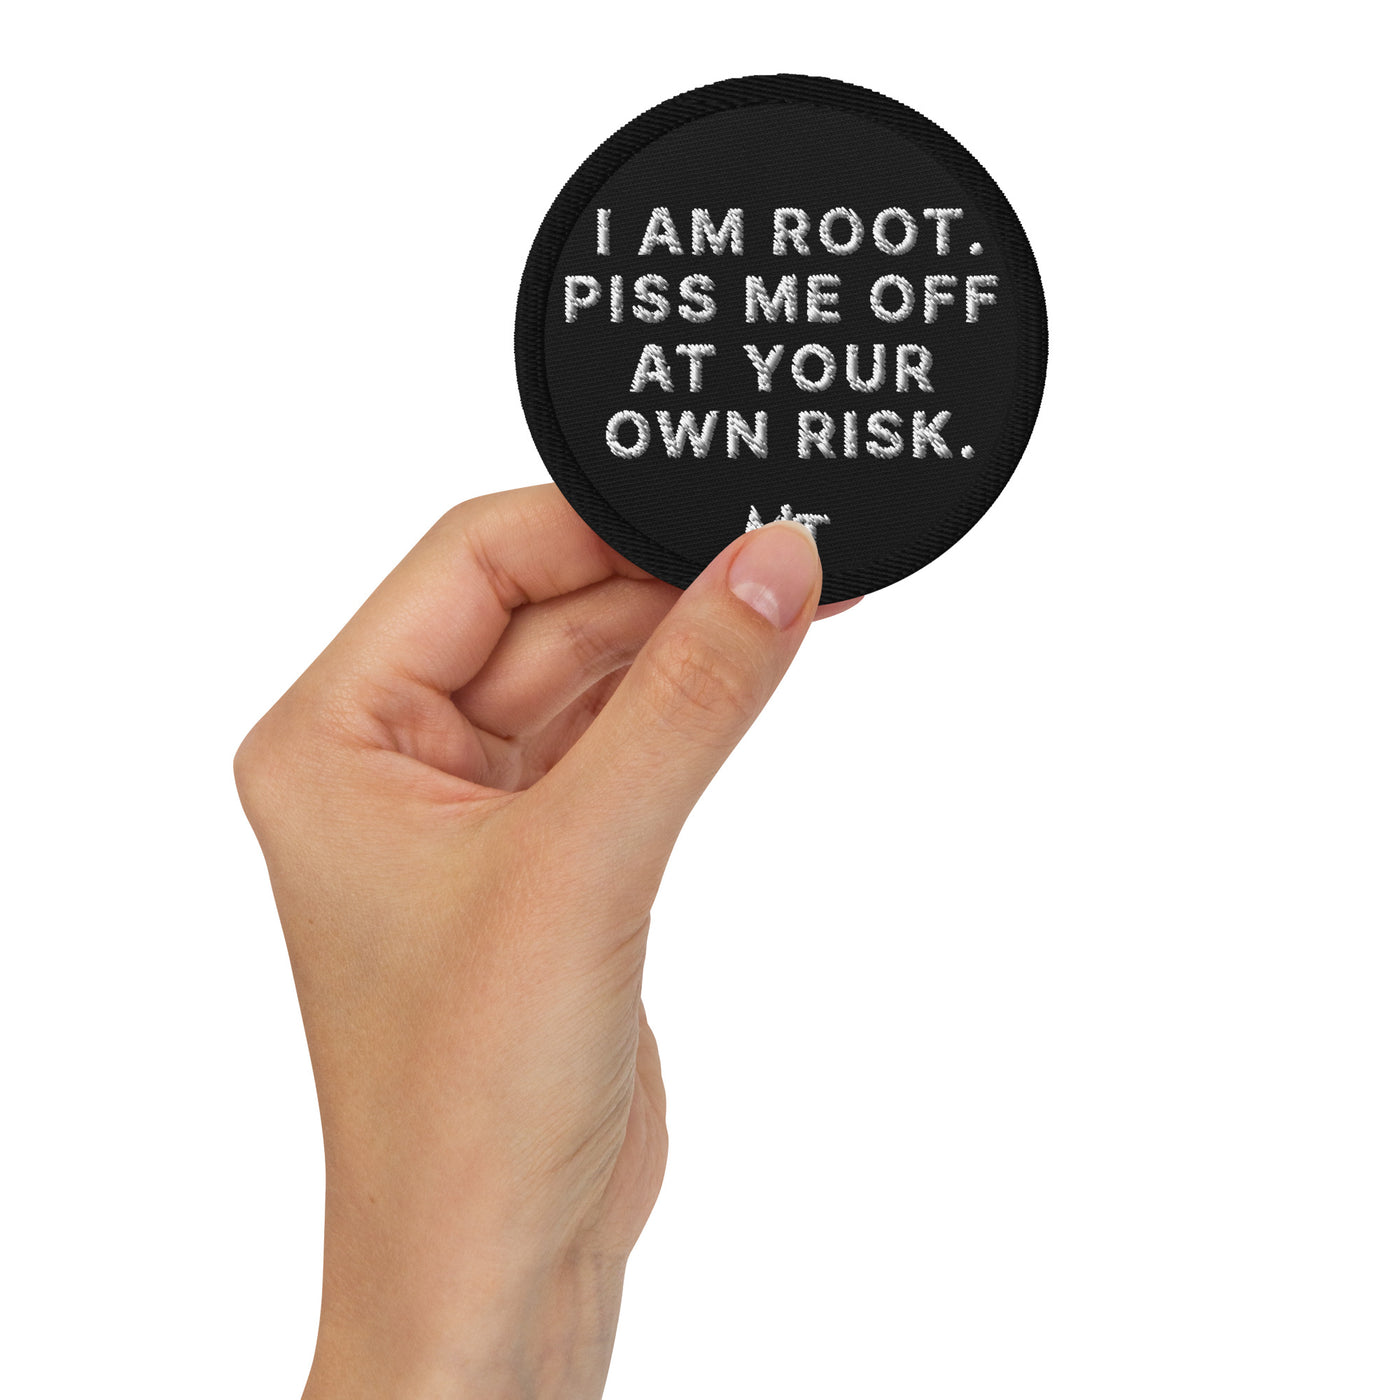 I am root. Piss me off at your own risk - Embroidered patches